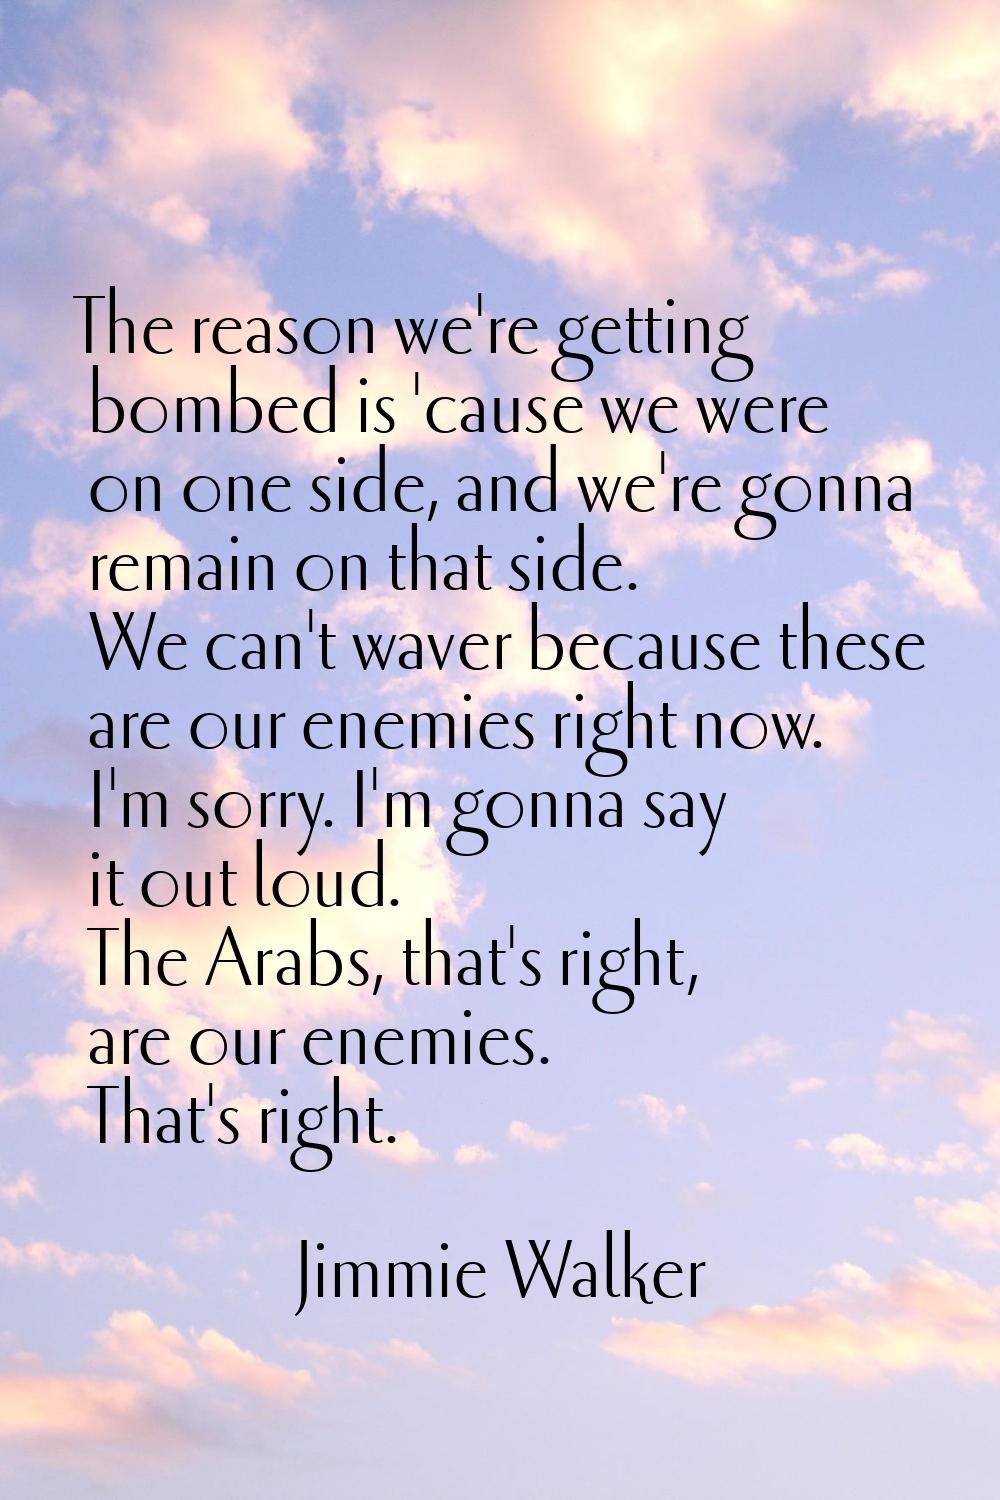 The reason we're getting bombed is 'cause we were on one side, and we're gonna remain on that side.